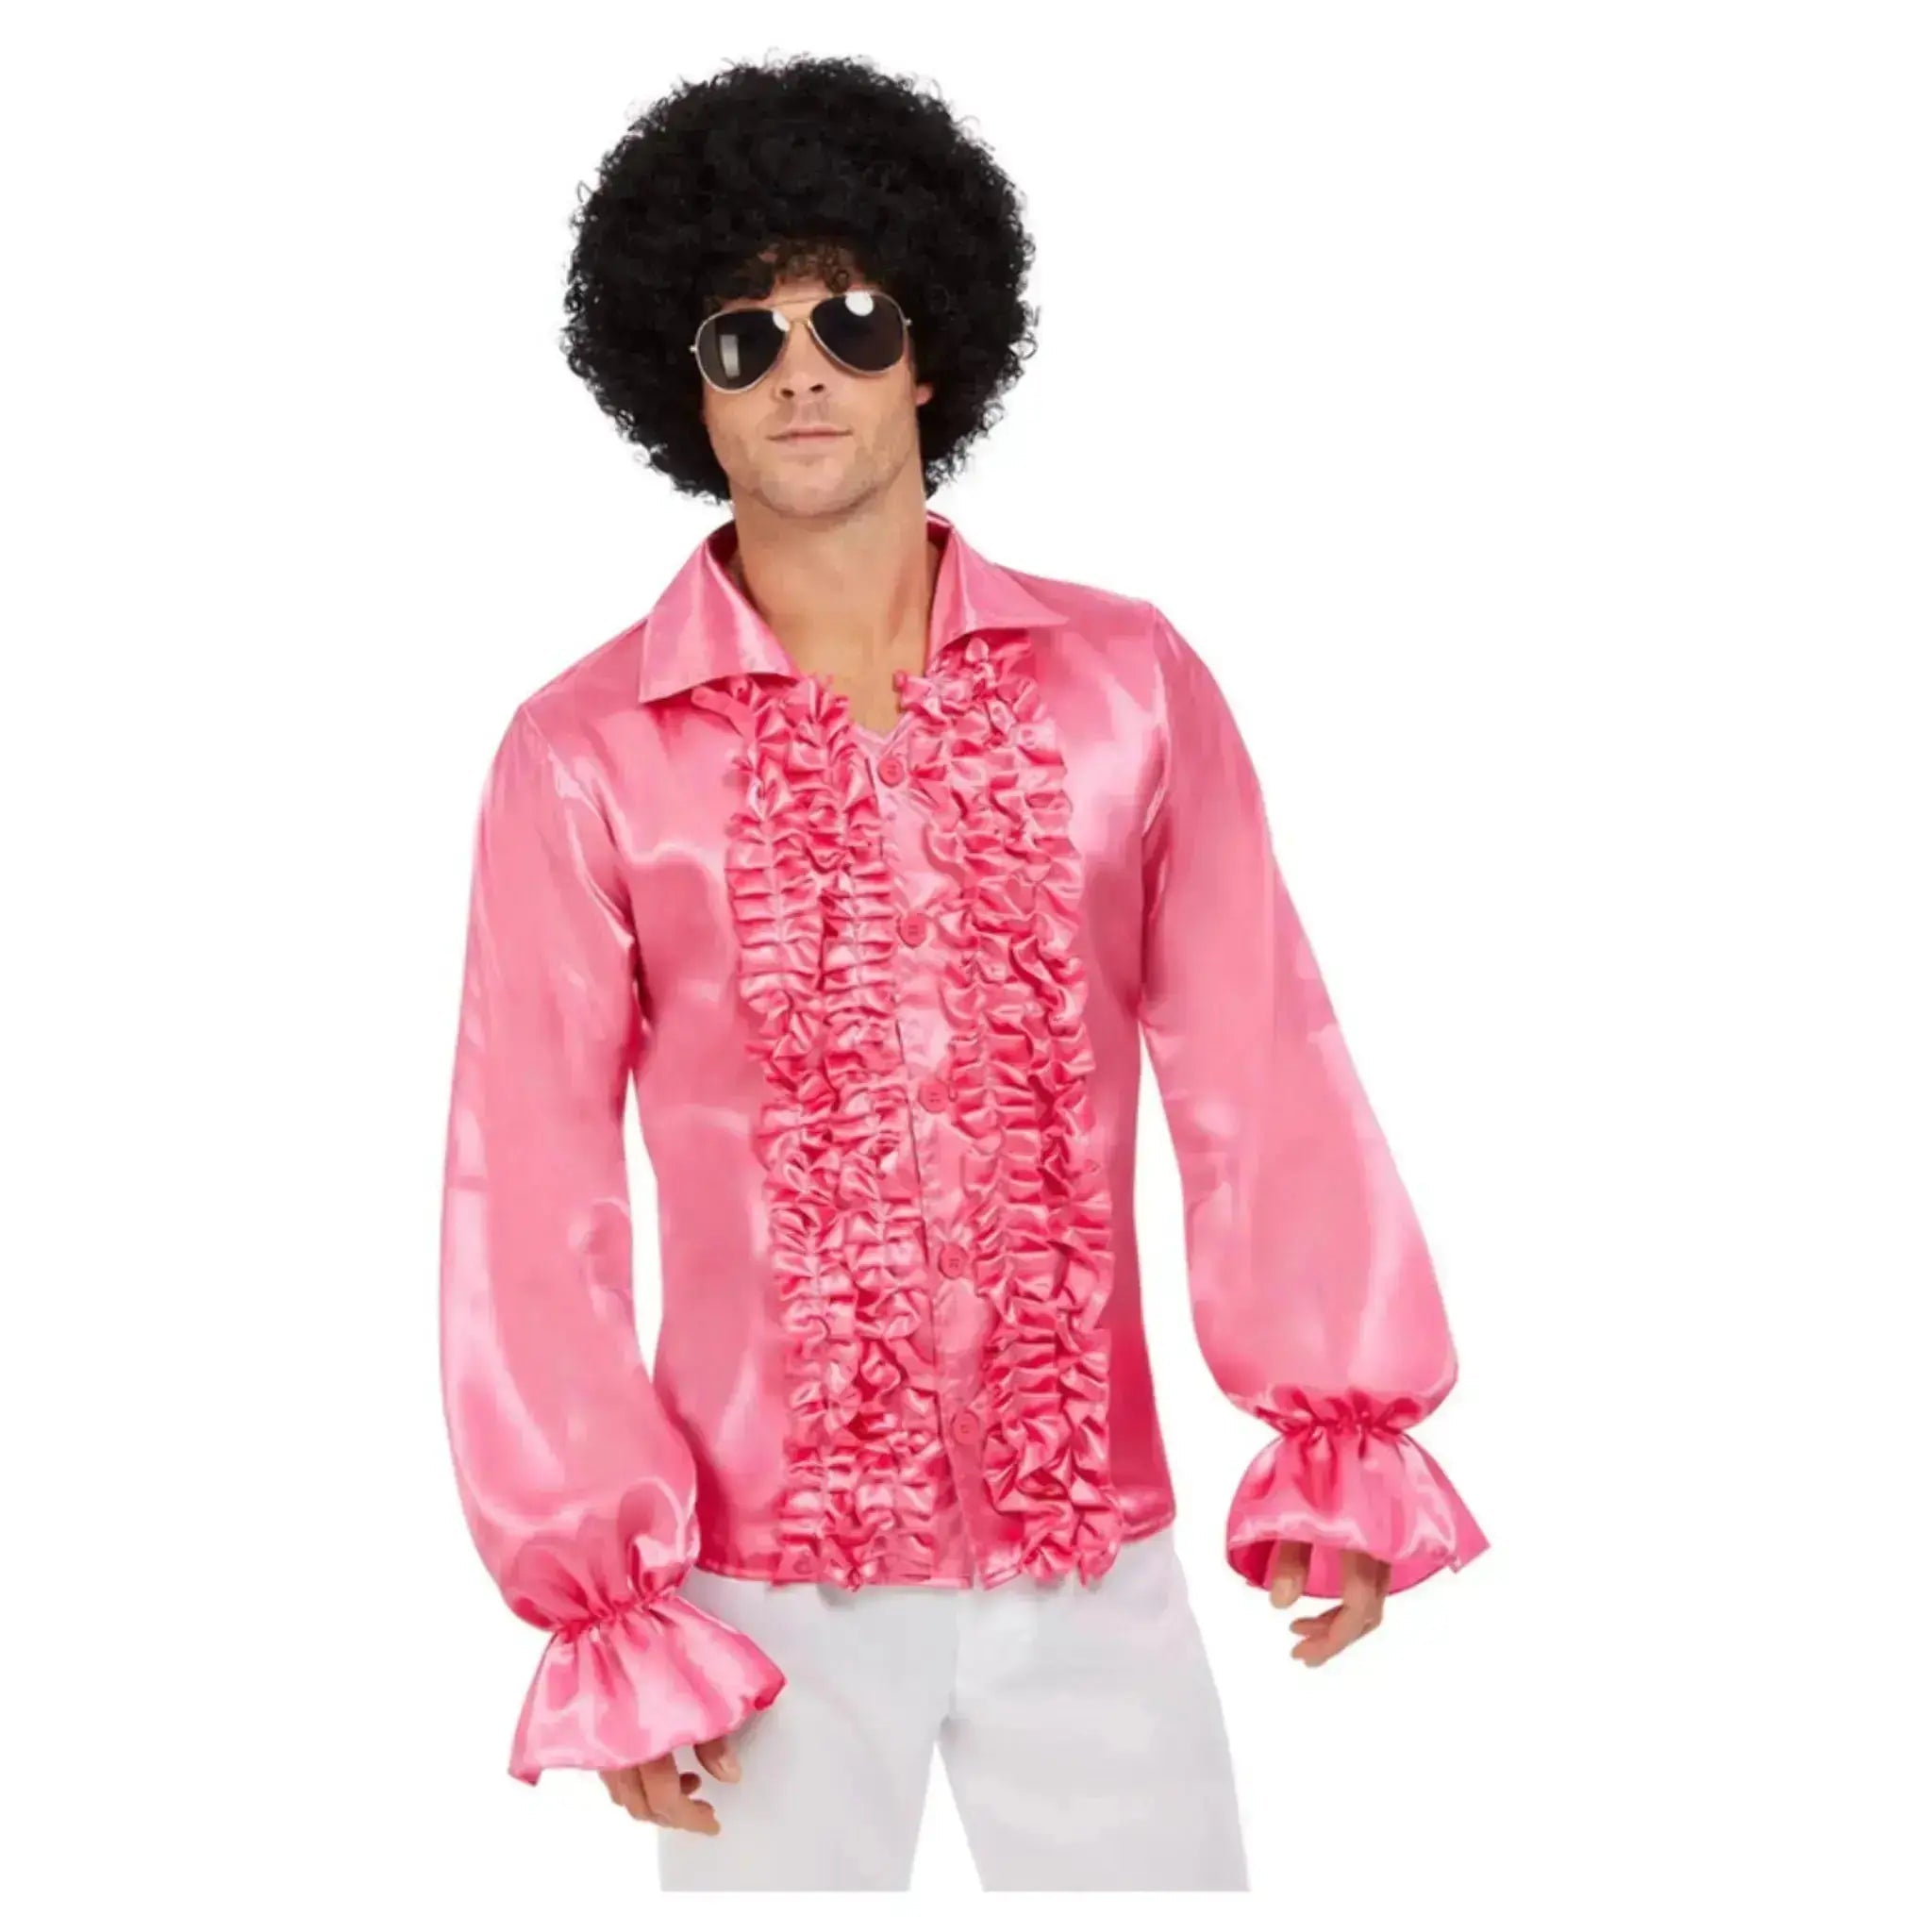 1960s Ruffled Shirt, Hot Pink | The Party Hut